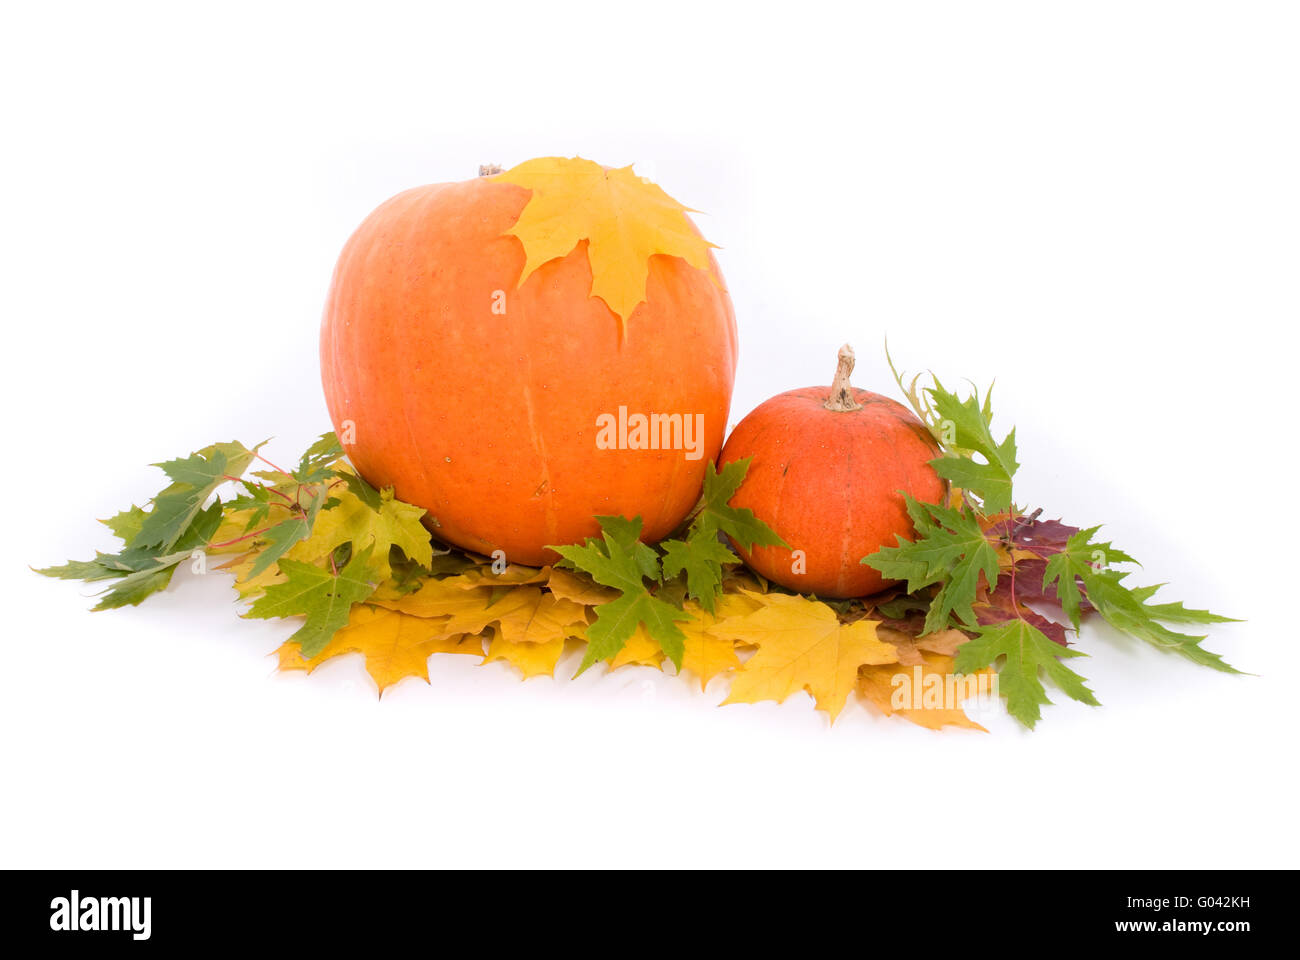 Pumpkins with fall leaves on white background Stock Photo